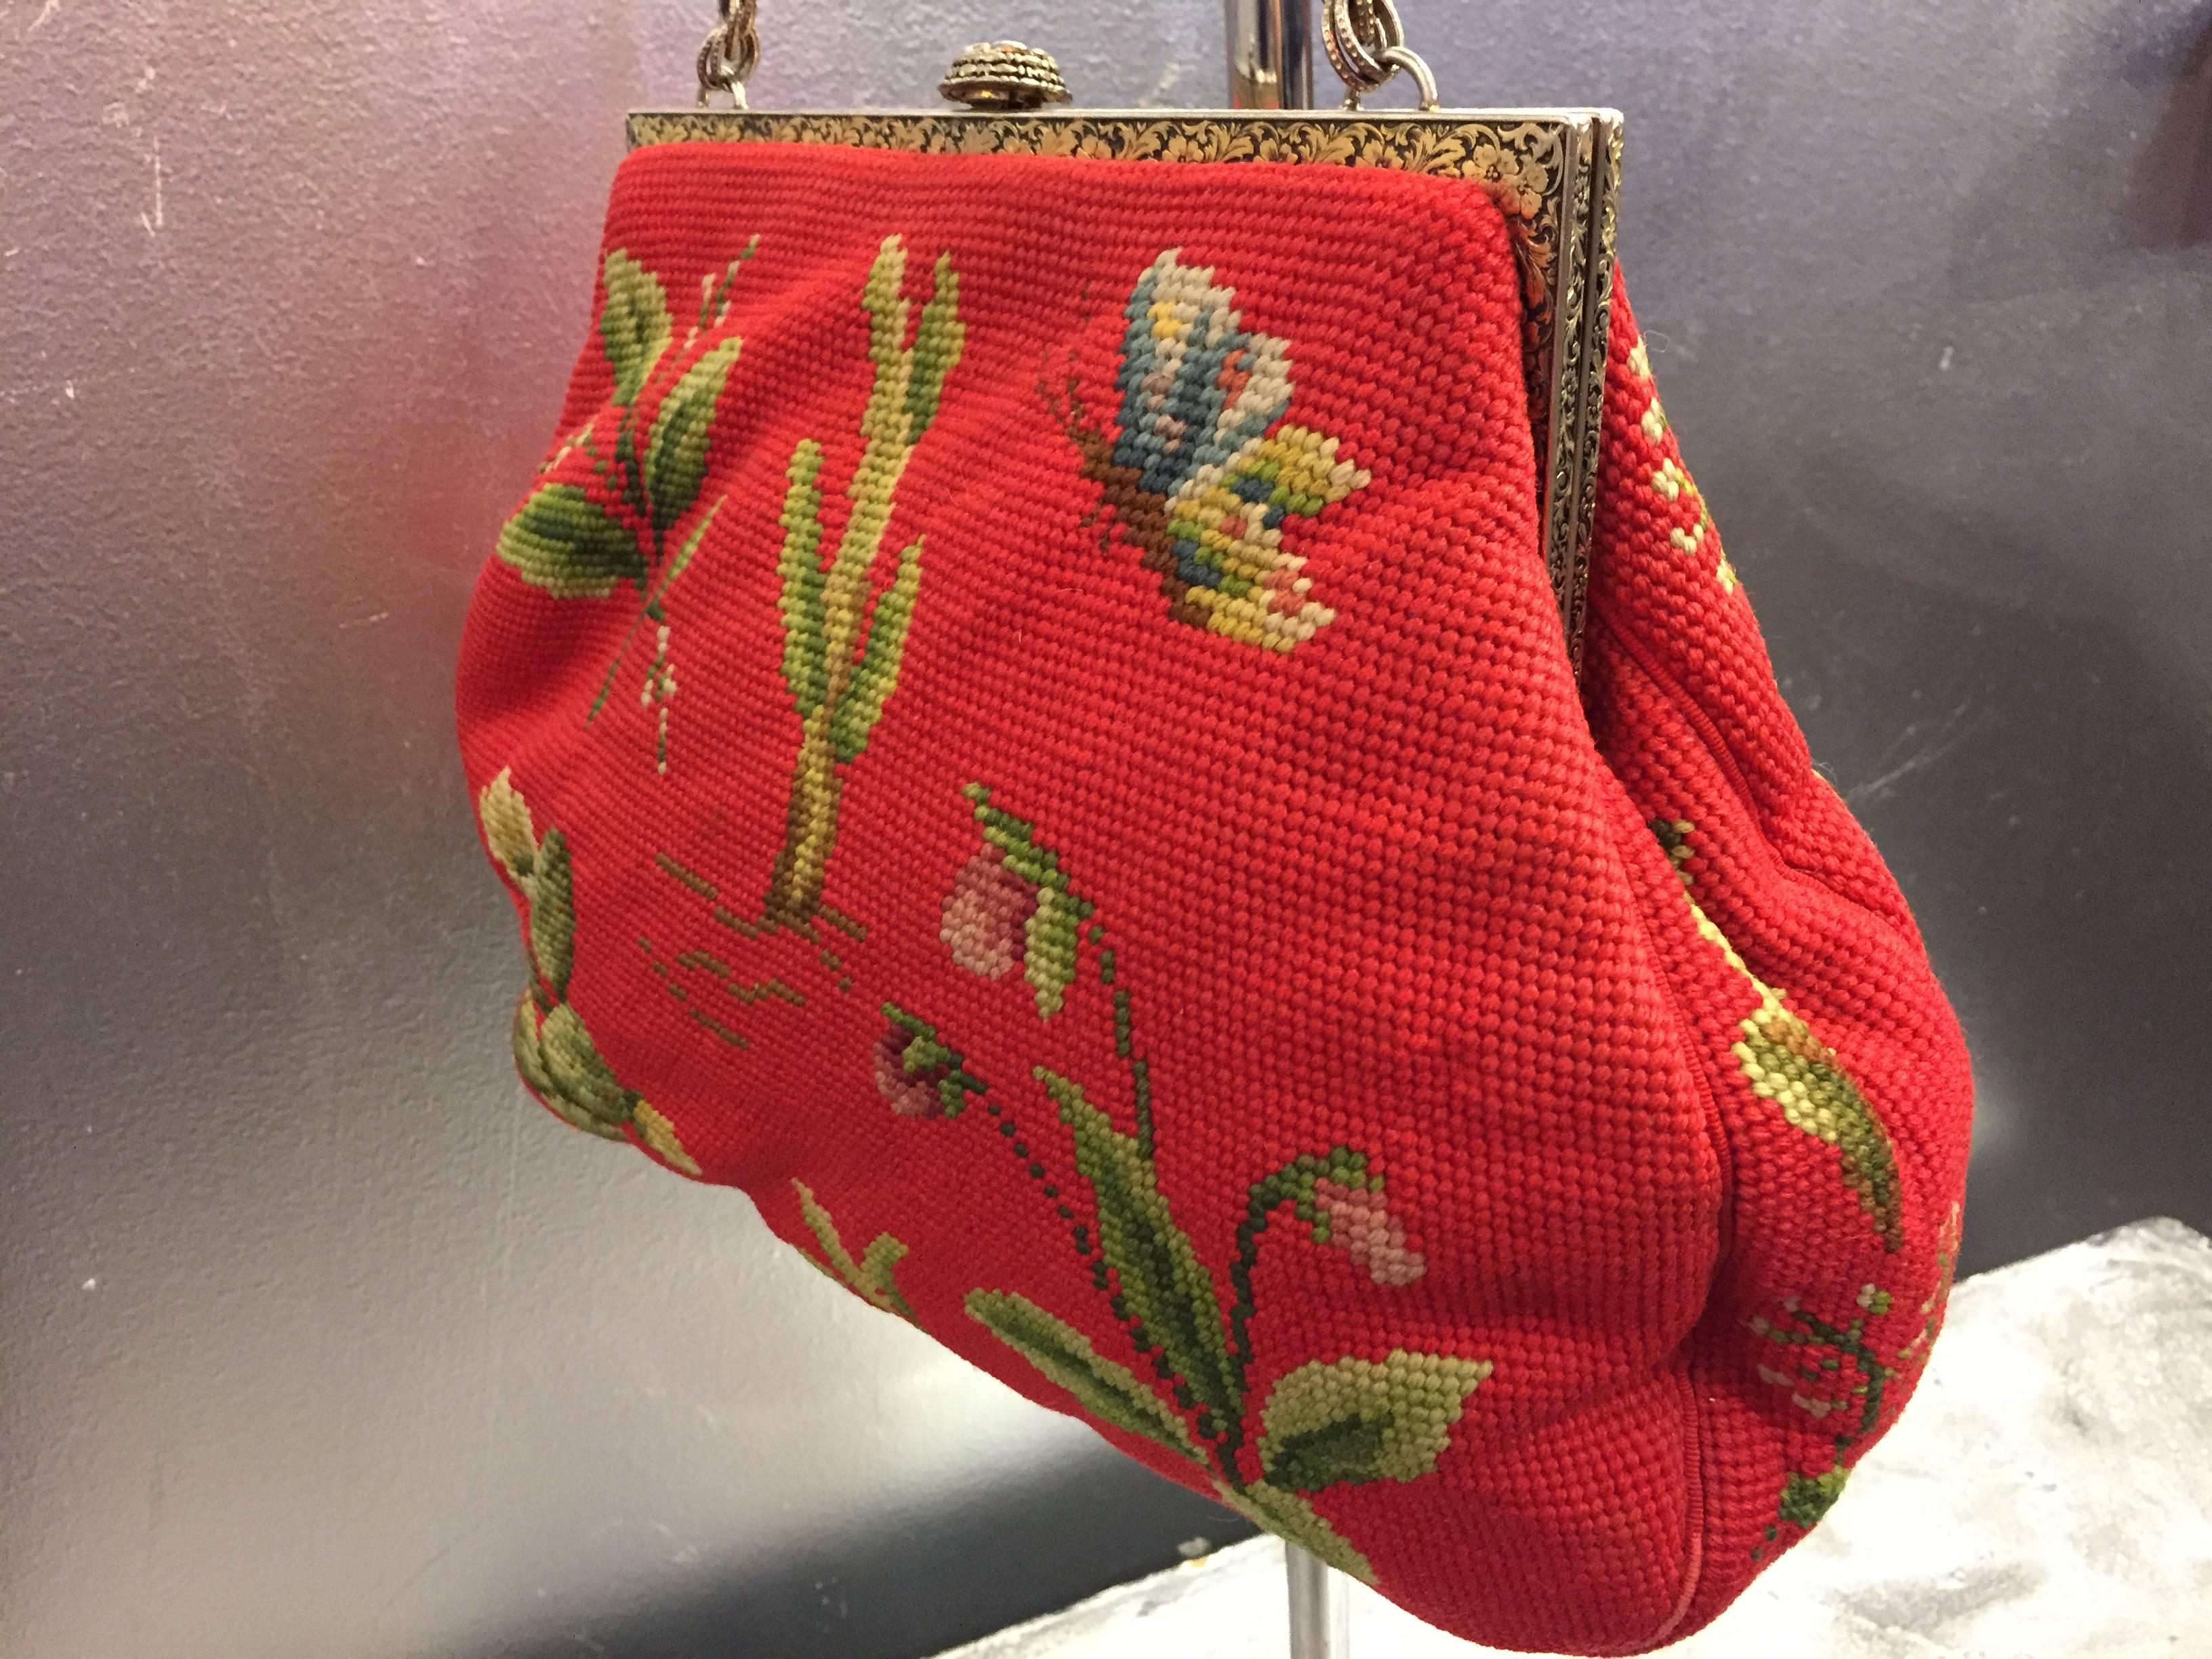 A fantastic and rare extra-large needlepoint purse from Maud Hundley in a lovely botanic pattern featuring butterflies, ladybugs, flowers and leaves. The frame features a floral scroll pattern in brass with a rosette clasp and chain handle. The